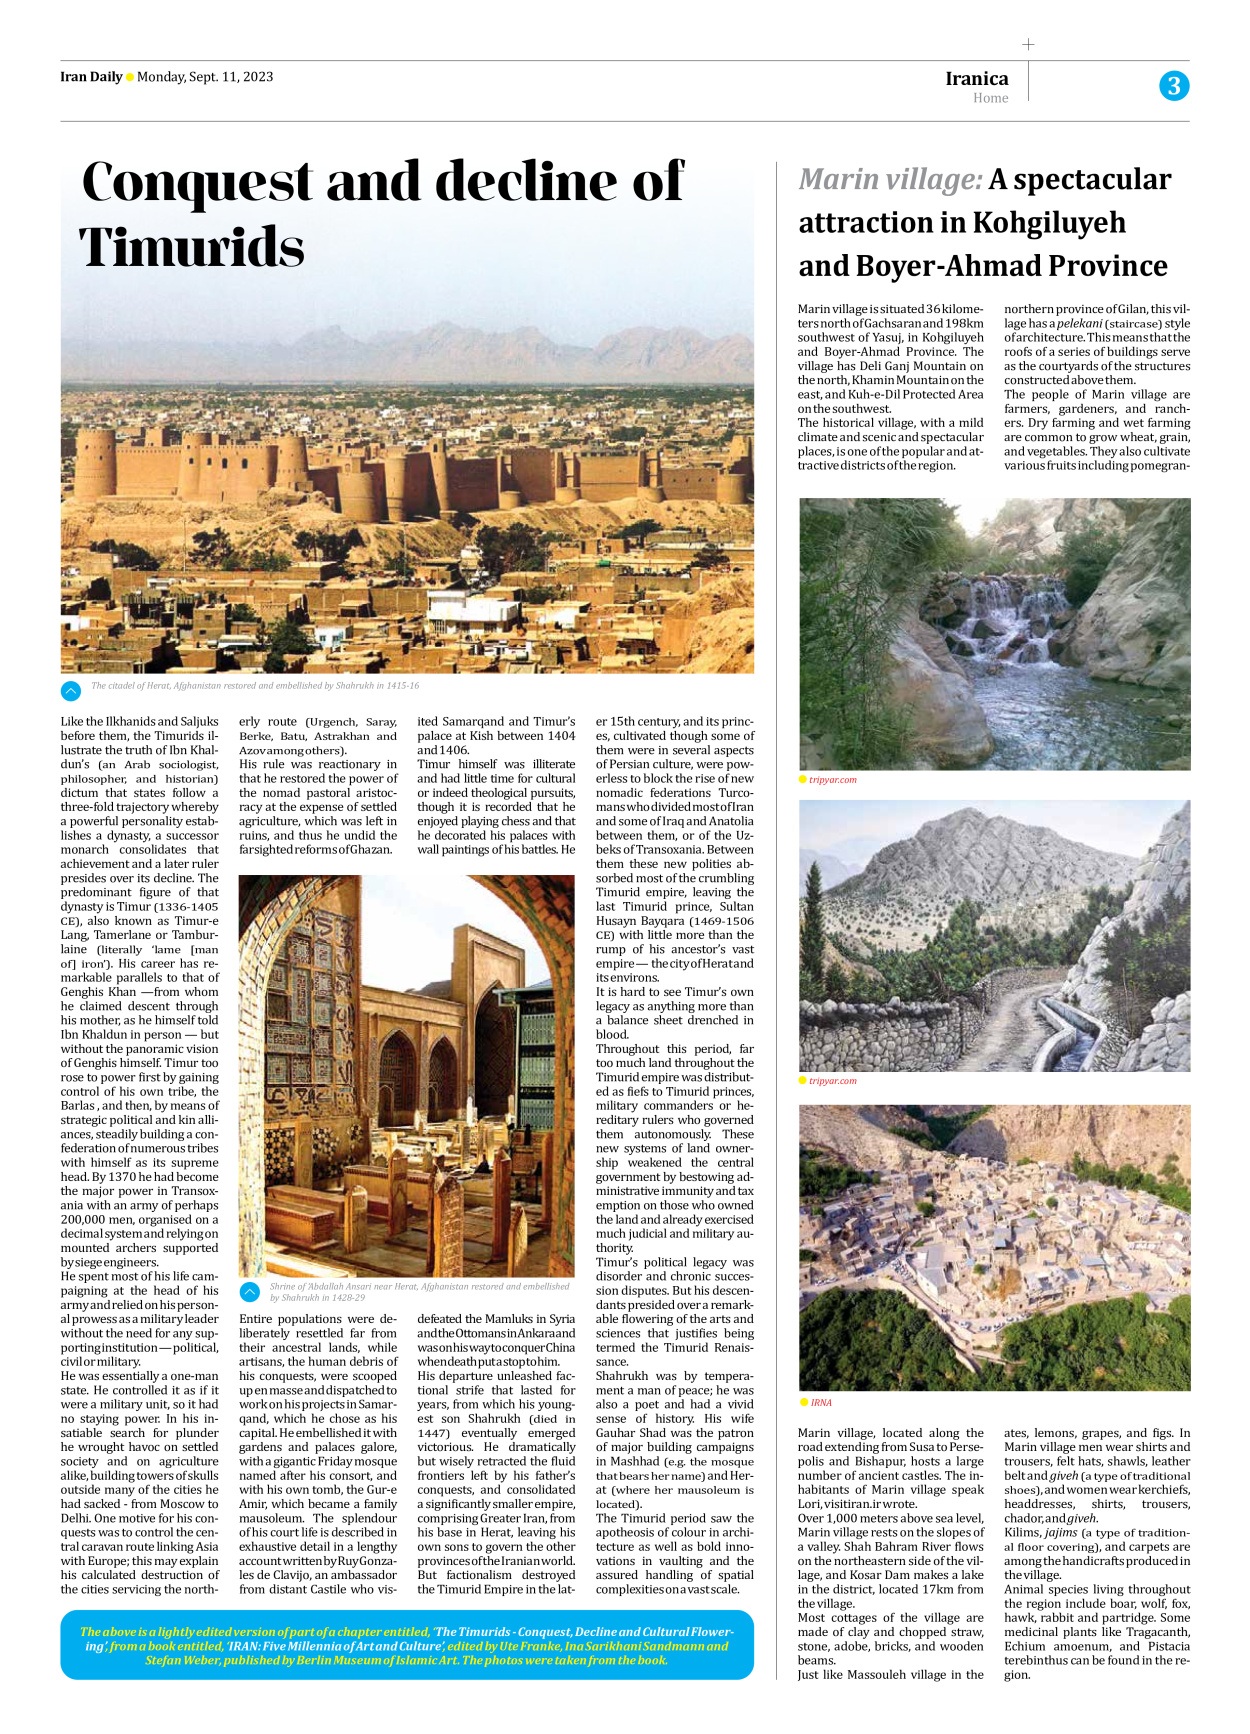 Iran Daily - Number Seven Thousand Three Hundred and Eighty Four - 11 September 2023 - Page 3